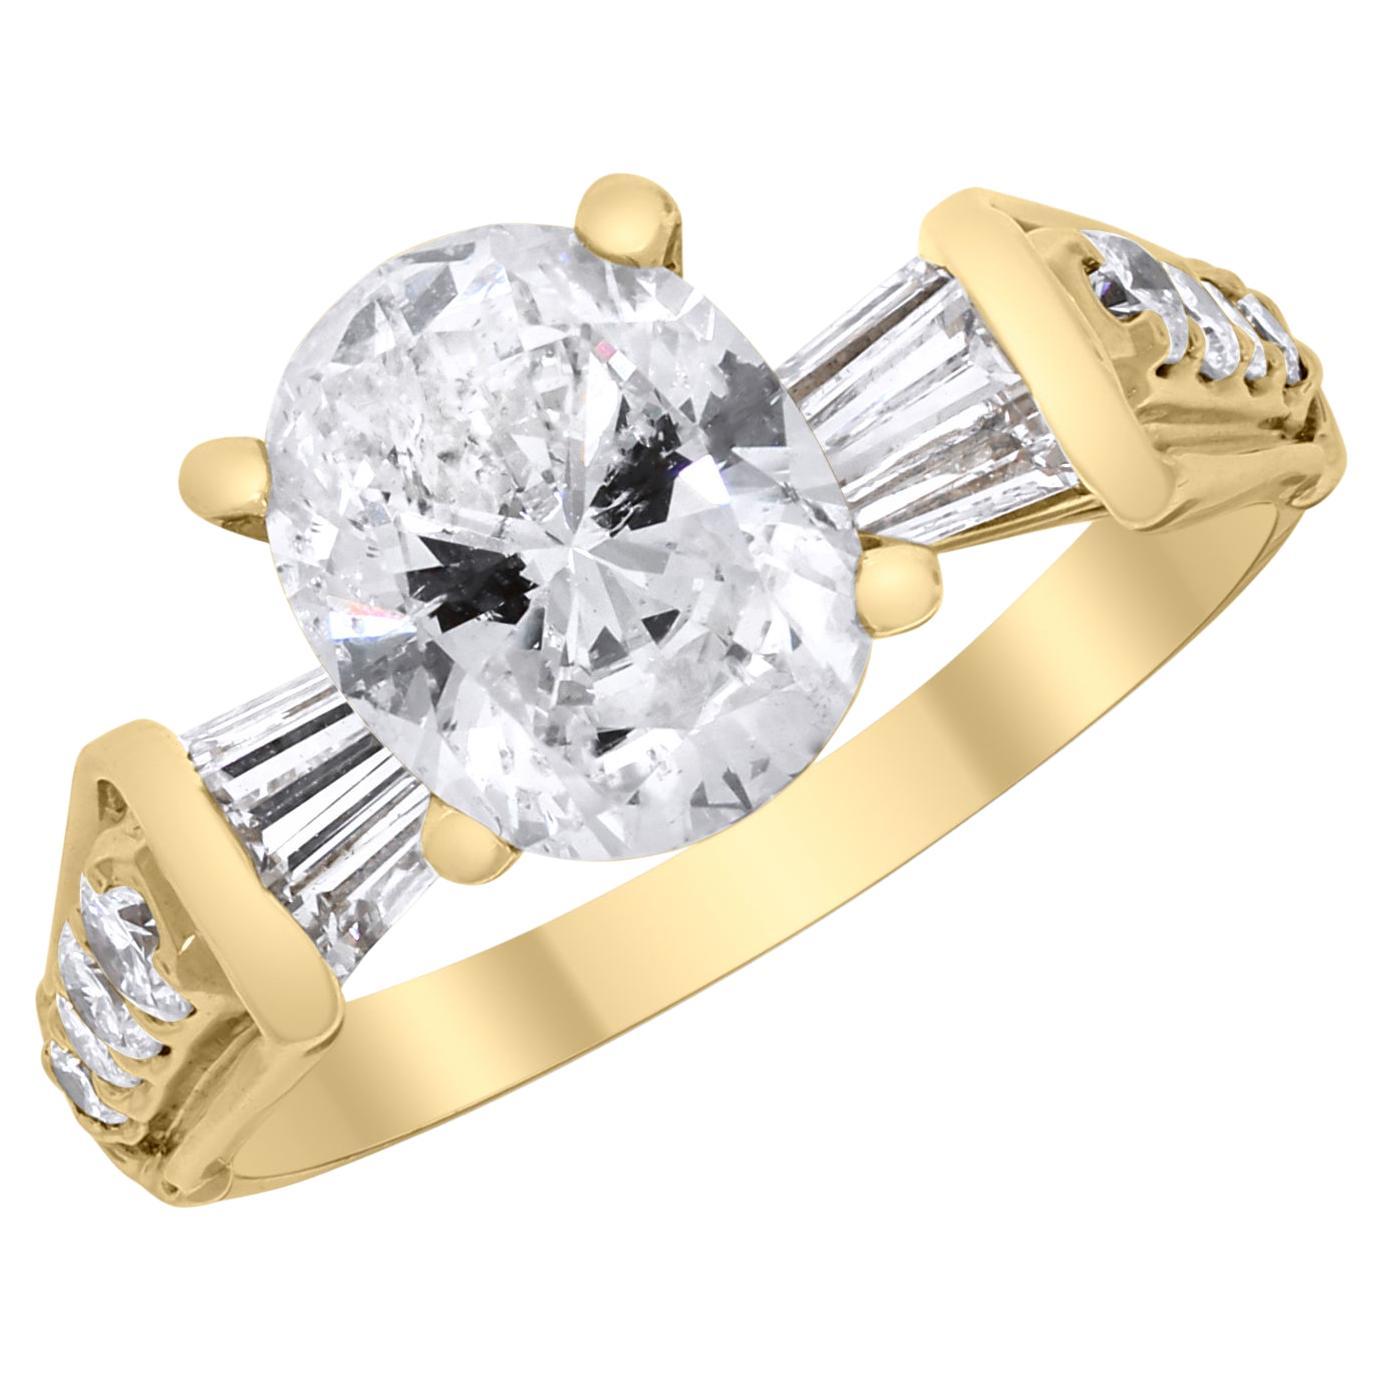 Beauvince Cynthia Engagement Ring, '1.62 Ct Oval Diamond' in Yellow Gold